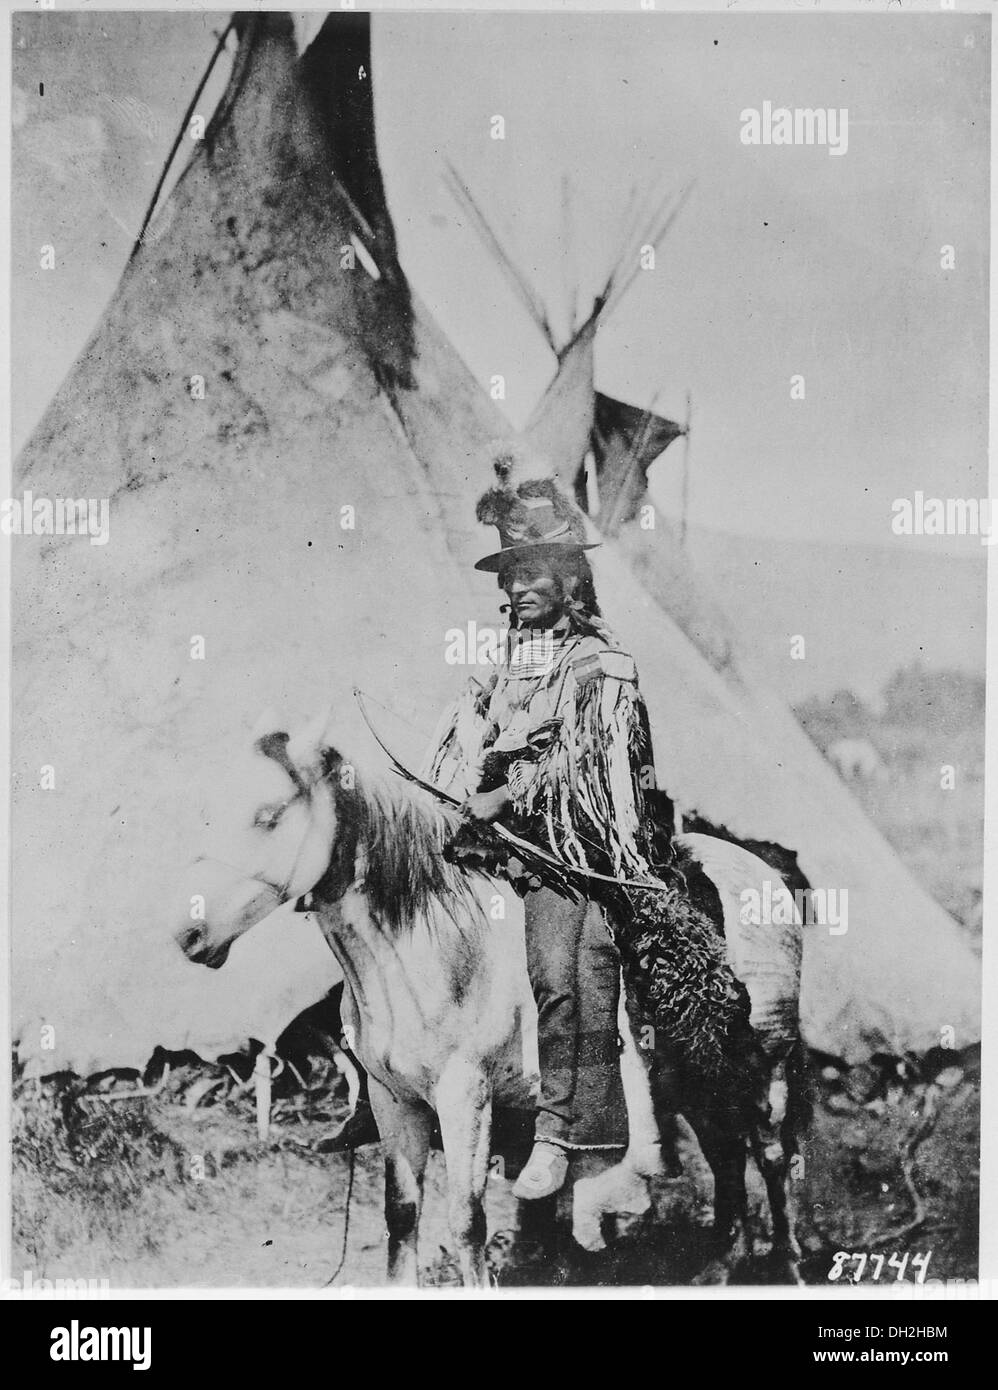 Looking Glass, a Nez Perce' chief, on horseback in front of a tepee, 1877 530914 Stock Photo